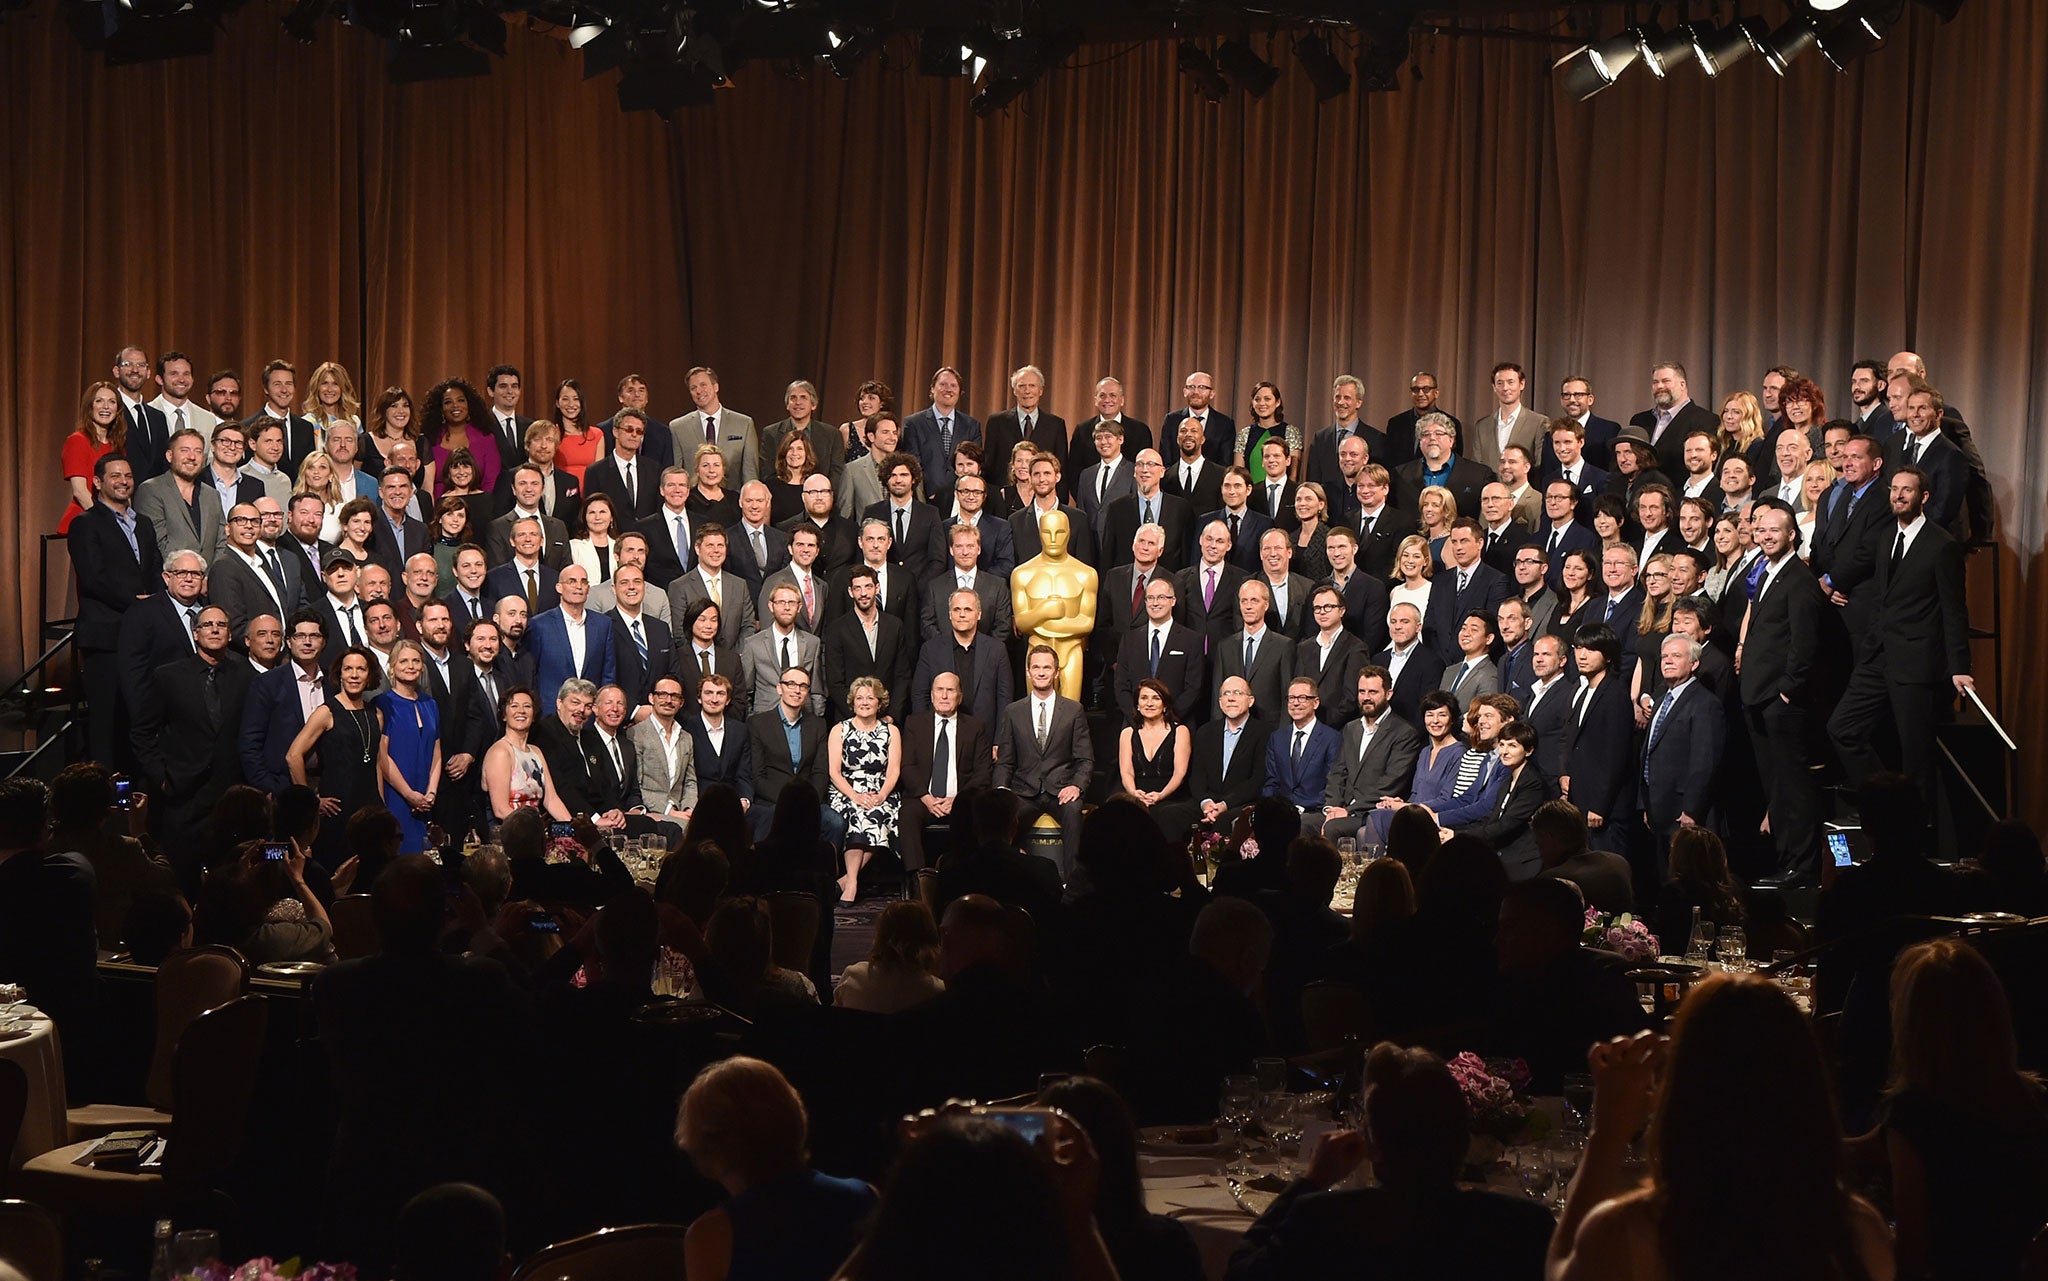 The 2015 Oscar nominees attend the annual Academy Awards luncheon in Hollywood